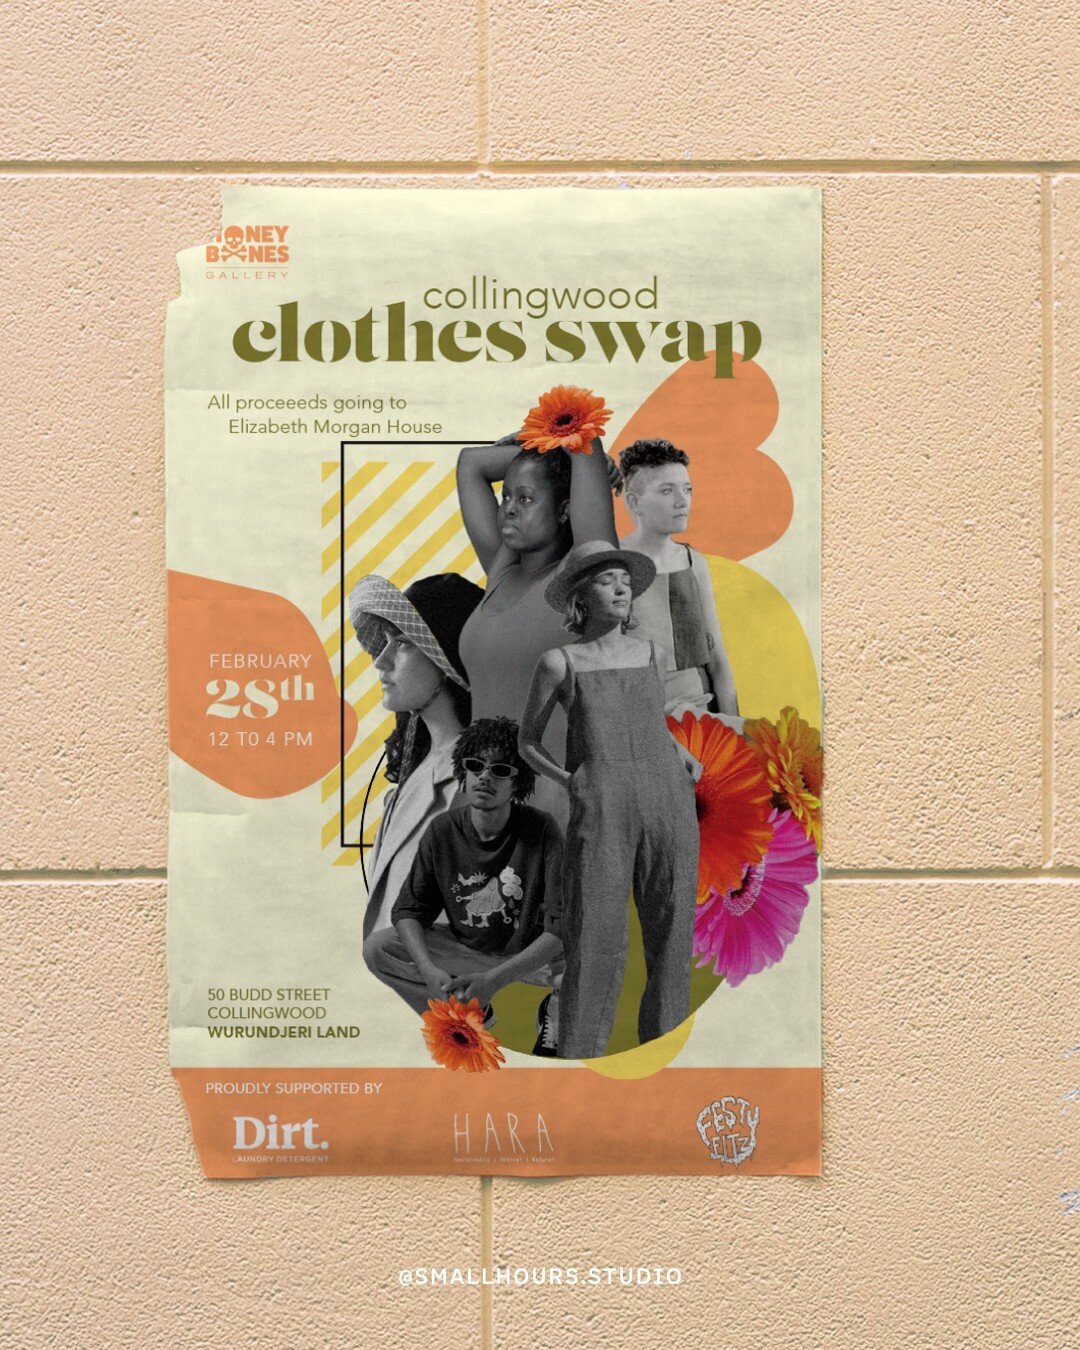 The Collingwood Clothes Swap is a not-for-profit event put on by Honey Bones Gallery, a culture-focused art gallery in Collingwood, Australia. The event was a huge success!
.
.
.
#graphicdesign #ephemera #posterdesign #flyerdesign #communityfirst #cr